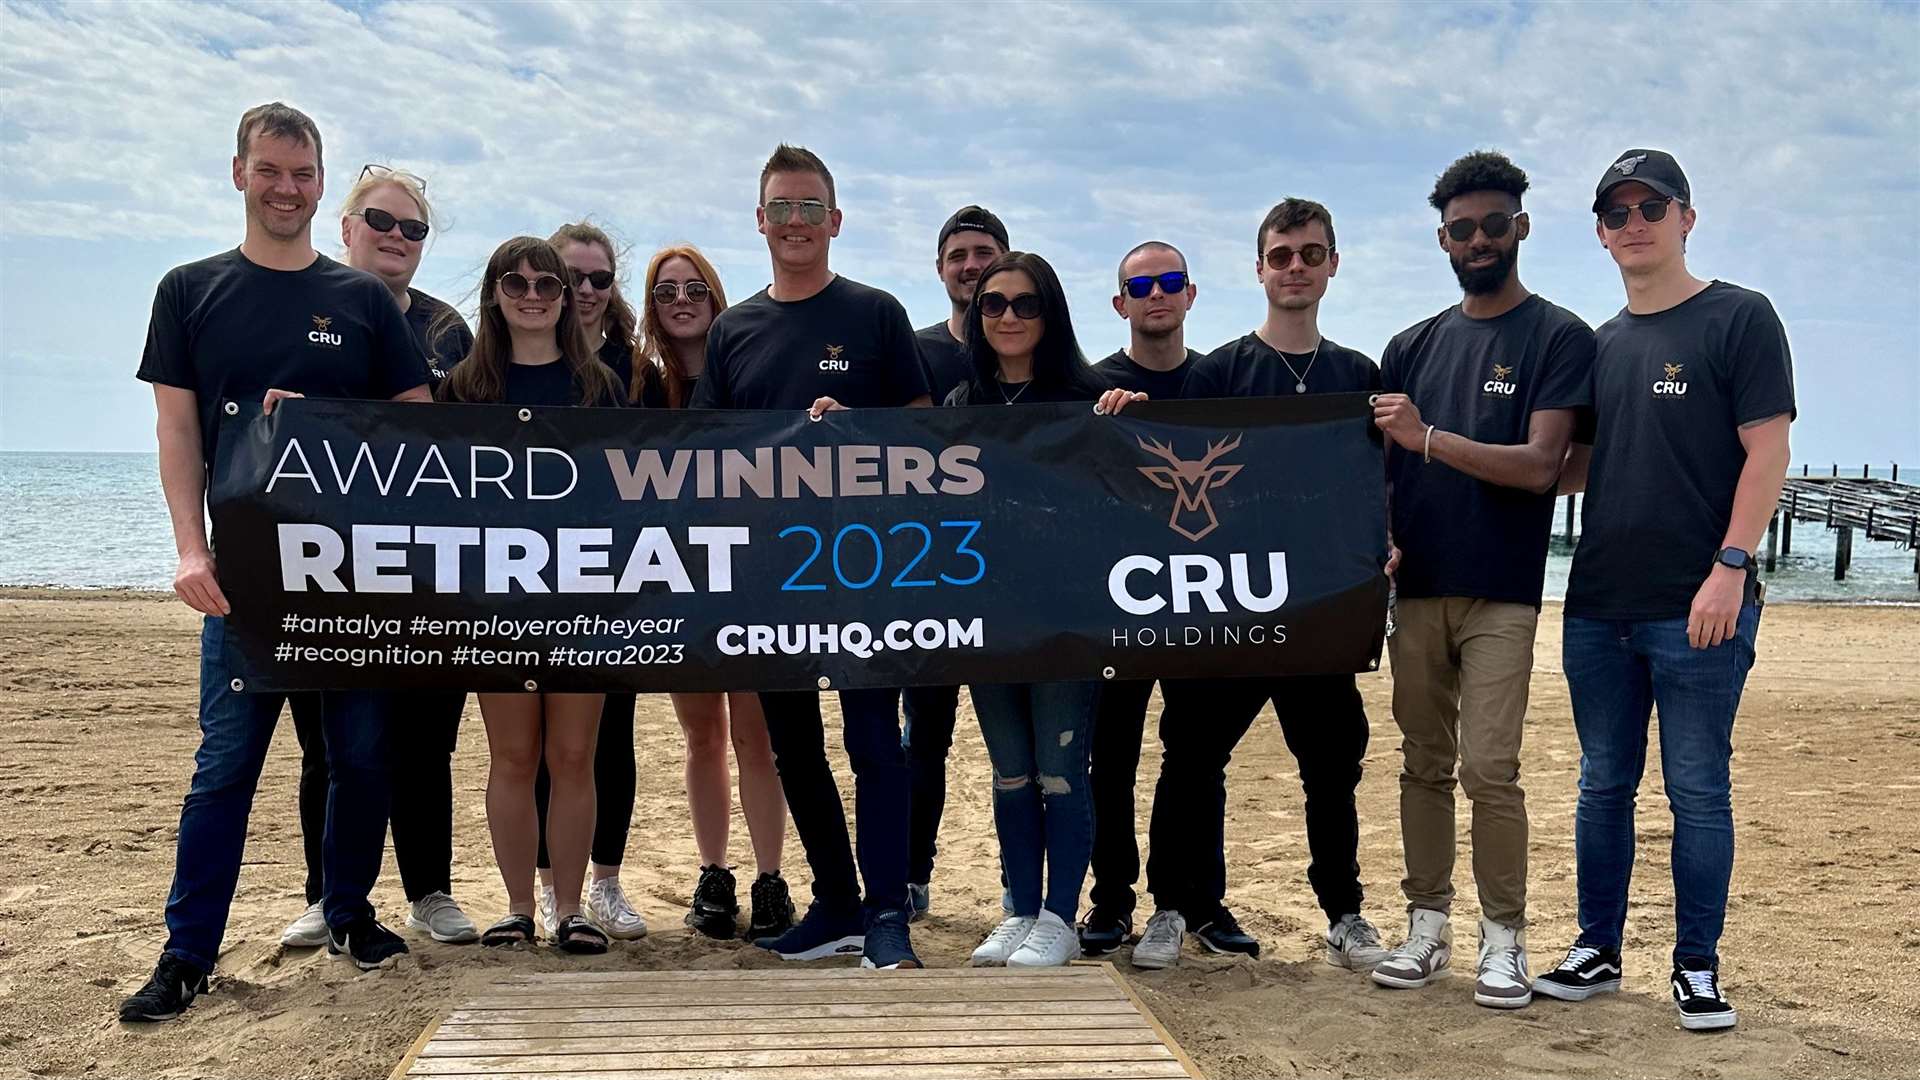 The Cru Holdings team in the Turkish Riviera.